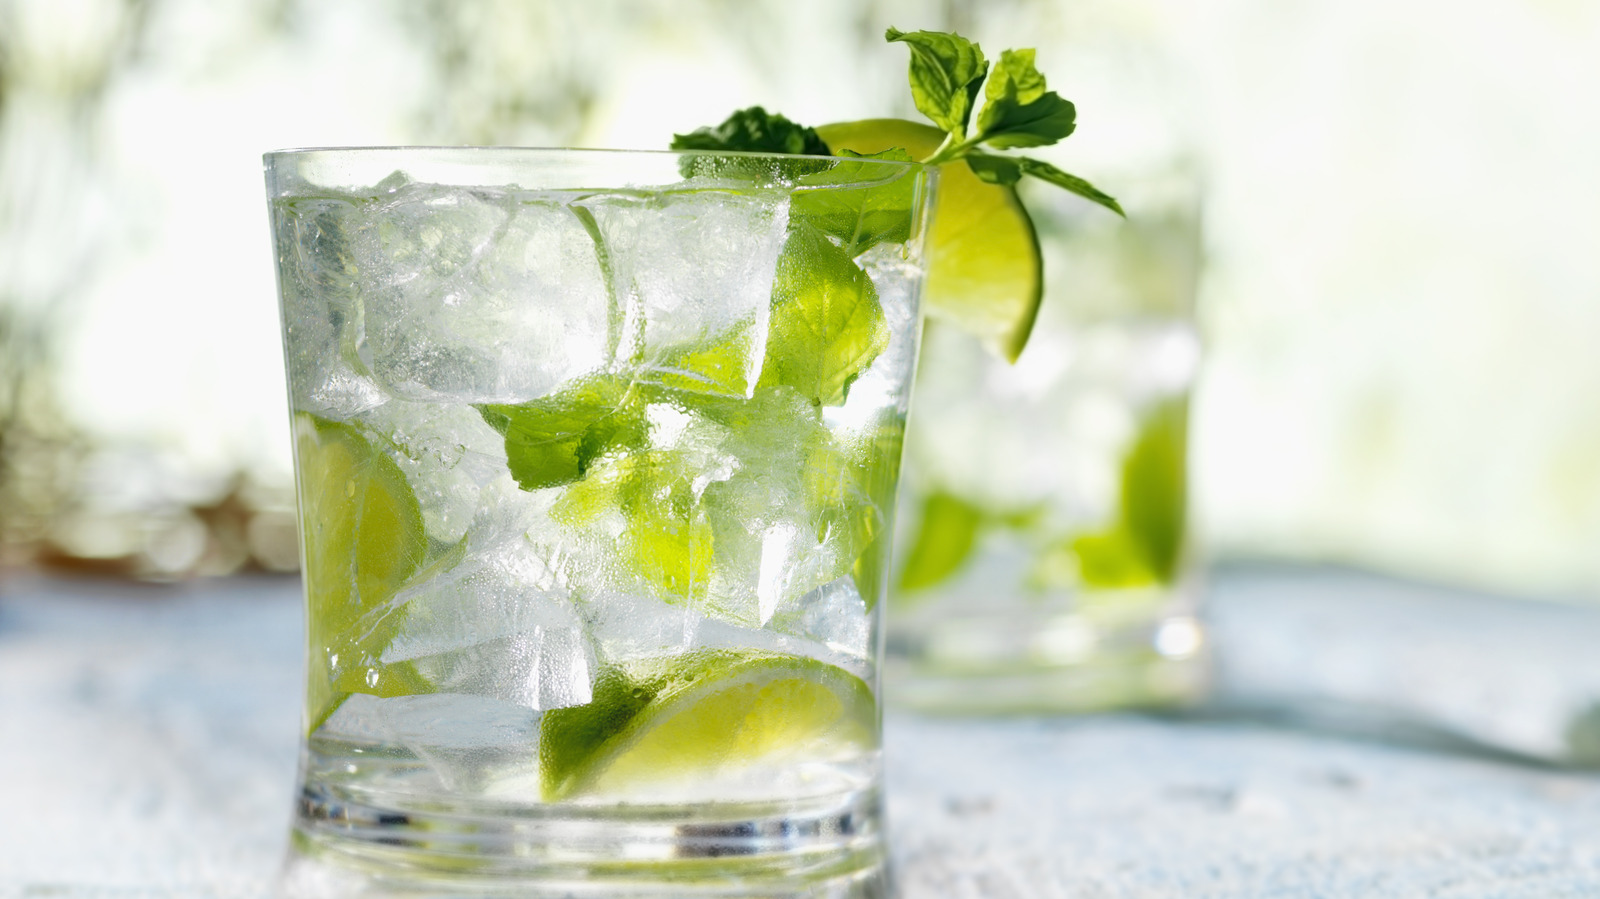 To muddle or not to muddle your mint: that is the Mojito question